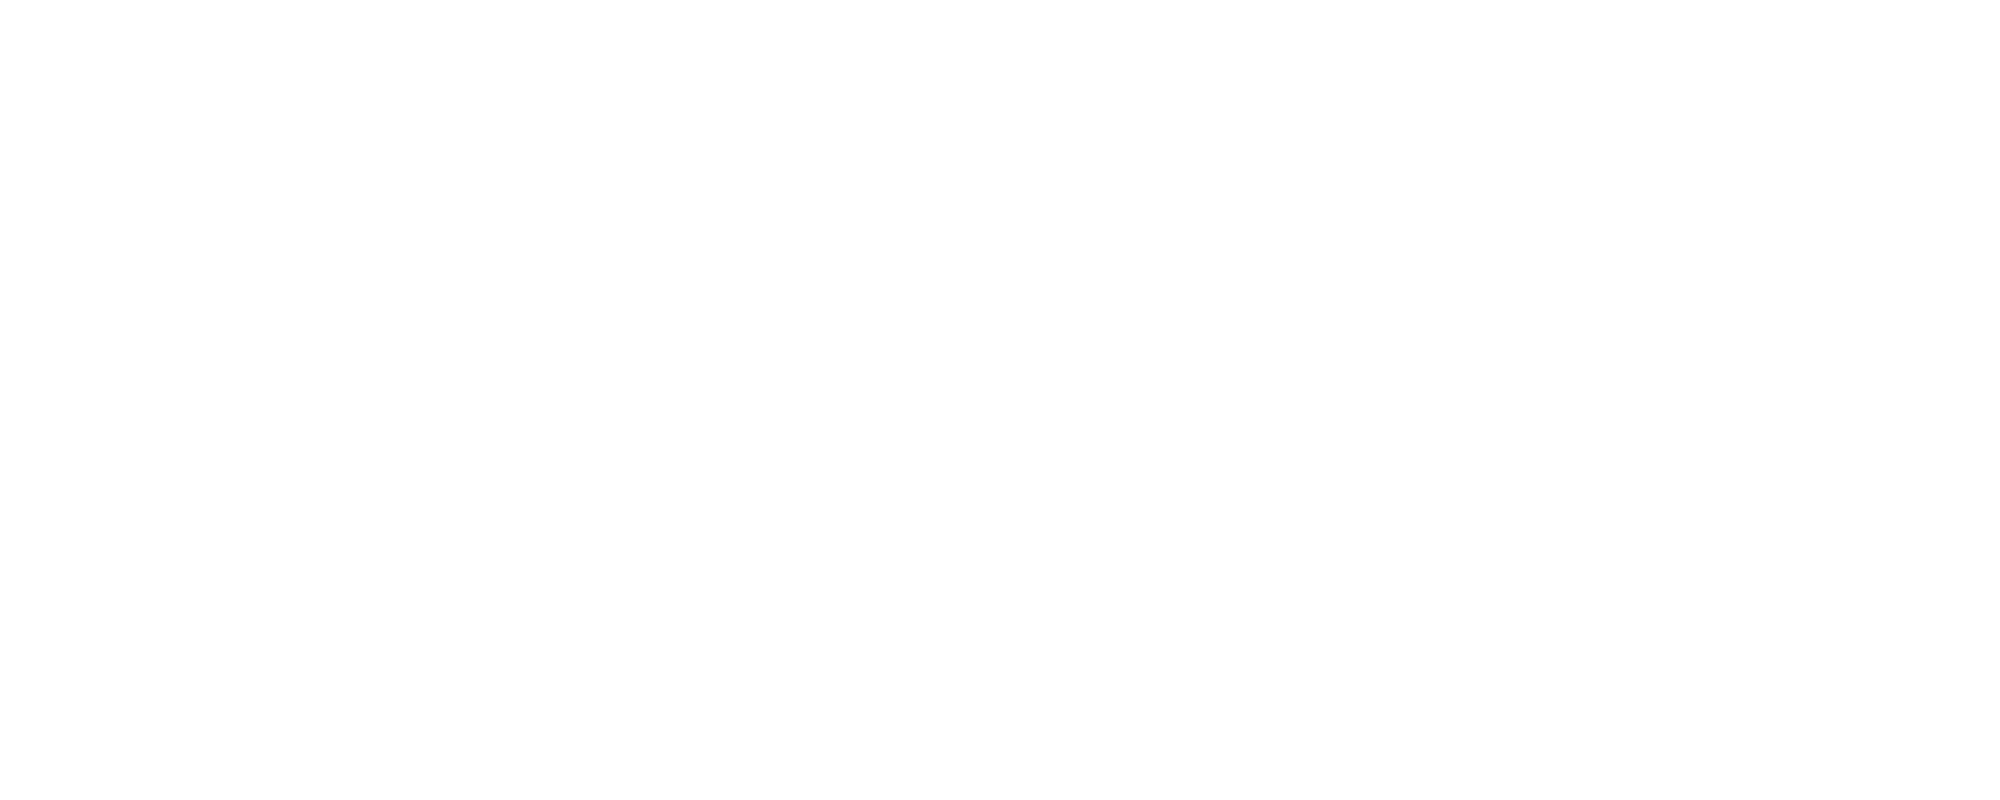 CHARTER COMMUNICATIONS PARTNERS WITH OVATION TV TO PRESENT $10,000 STAND FOR THE ARTS AWARD TO BALDWIN WALLACE COMMUNITY ARTS SCHOOL